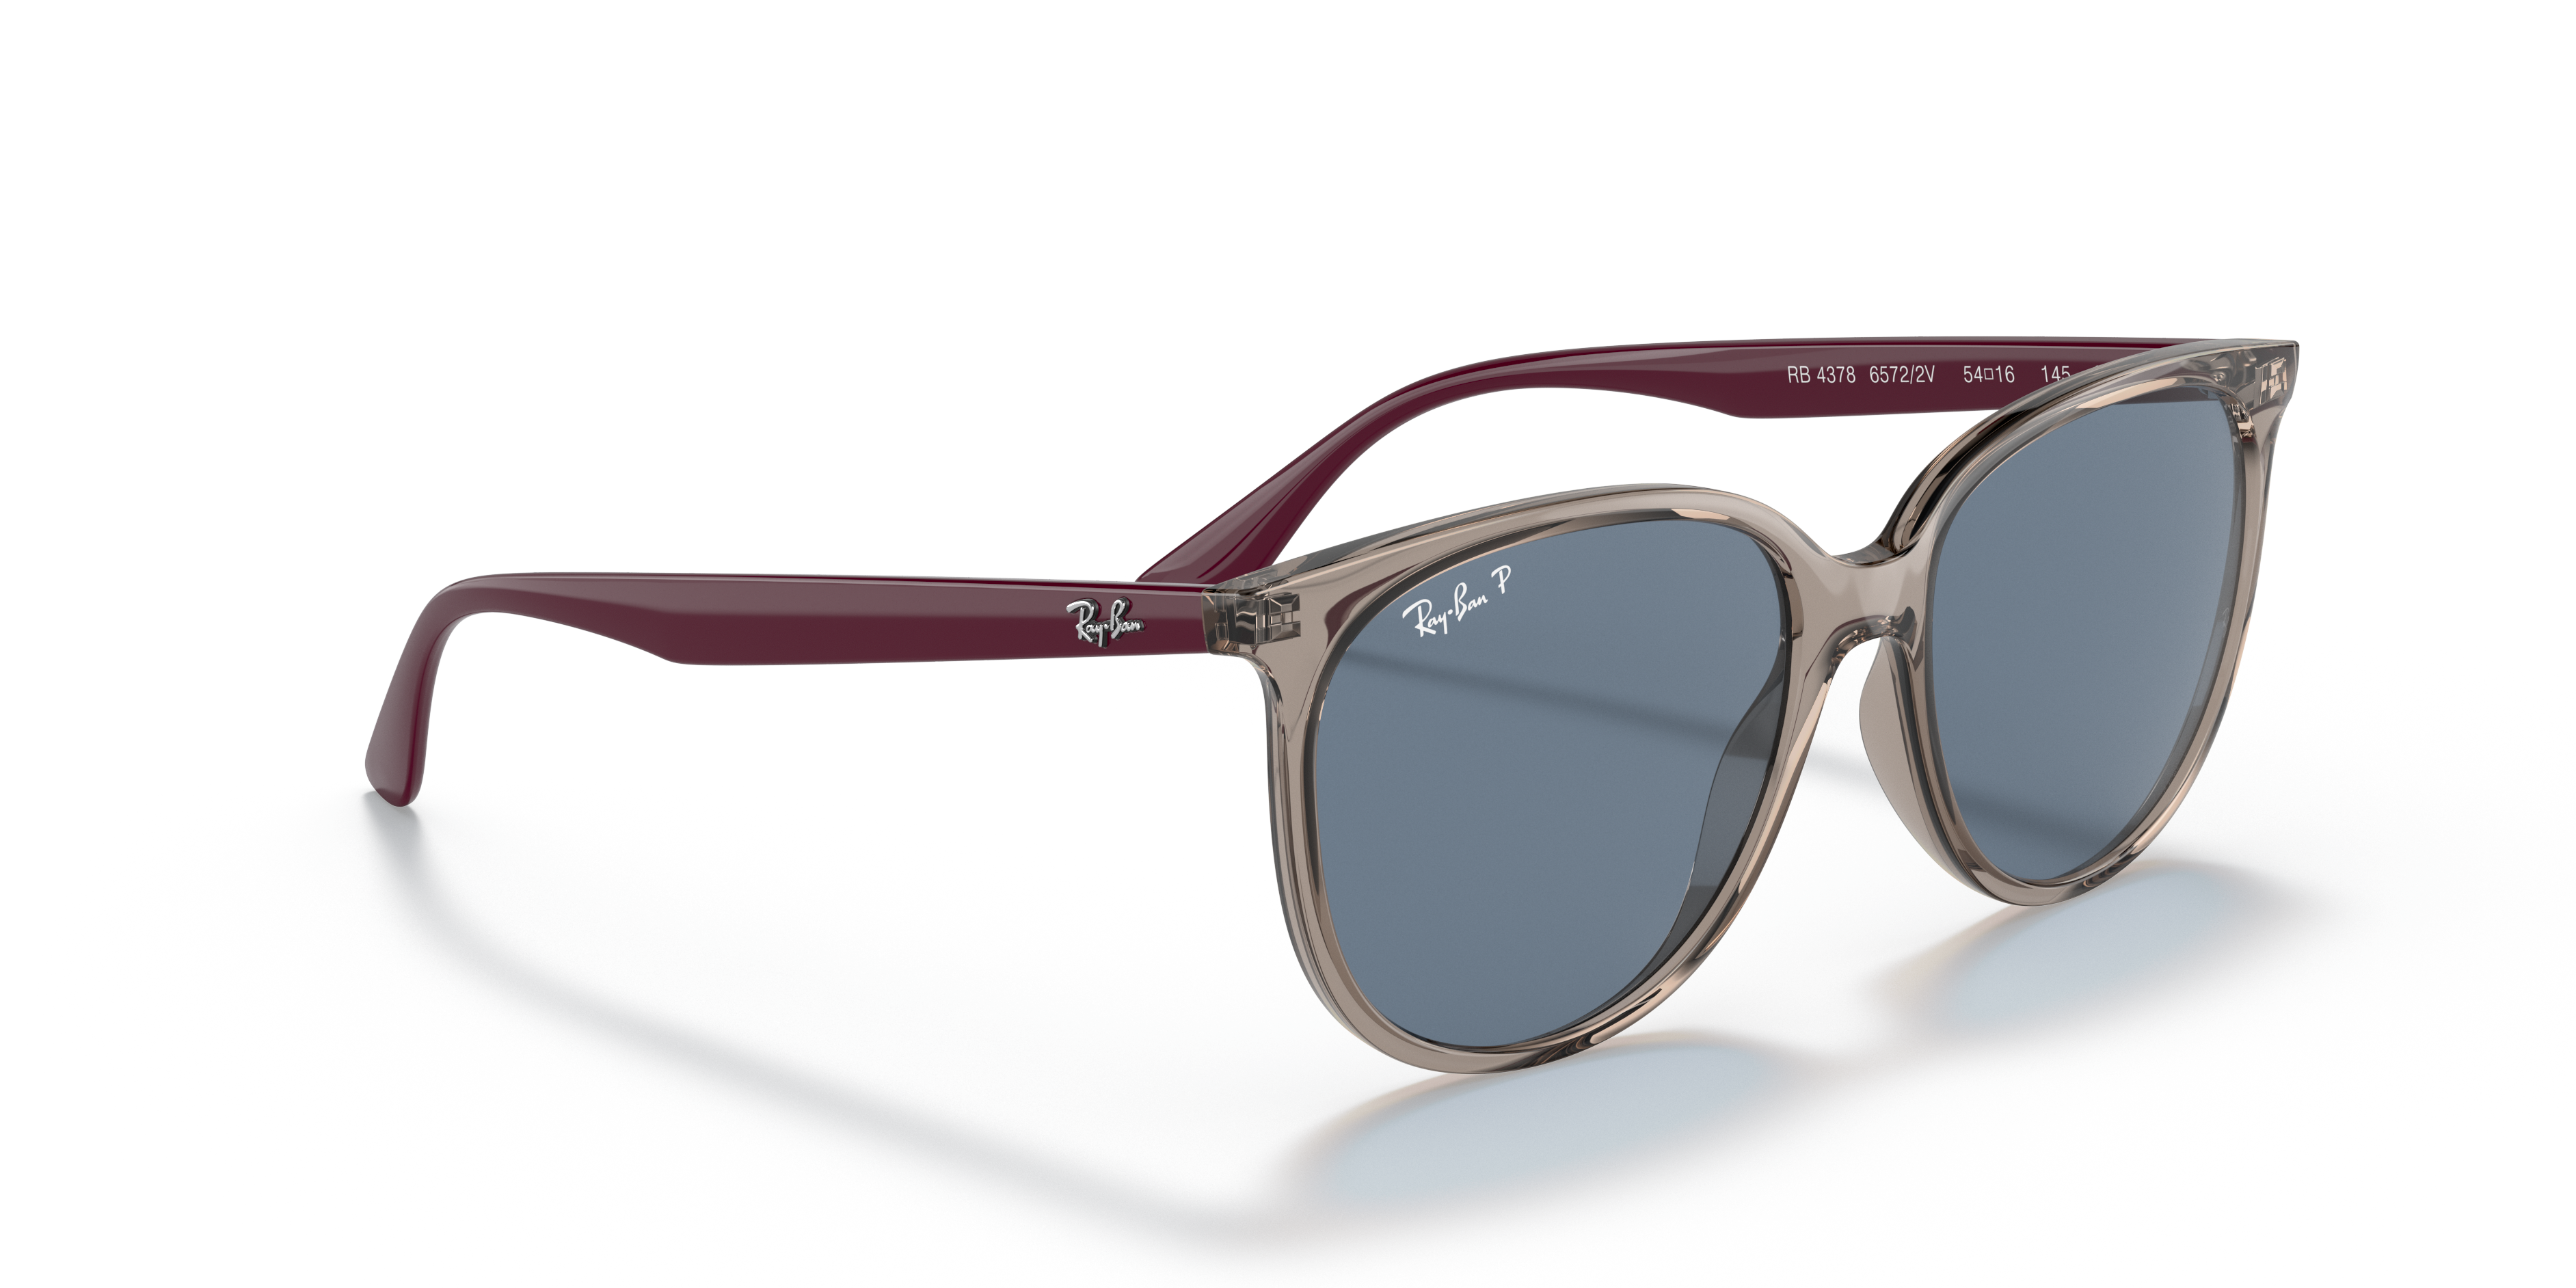 Rb4378 Sunglasses in Transparent Grey and Blue | Ray-Ban®